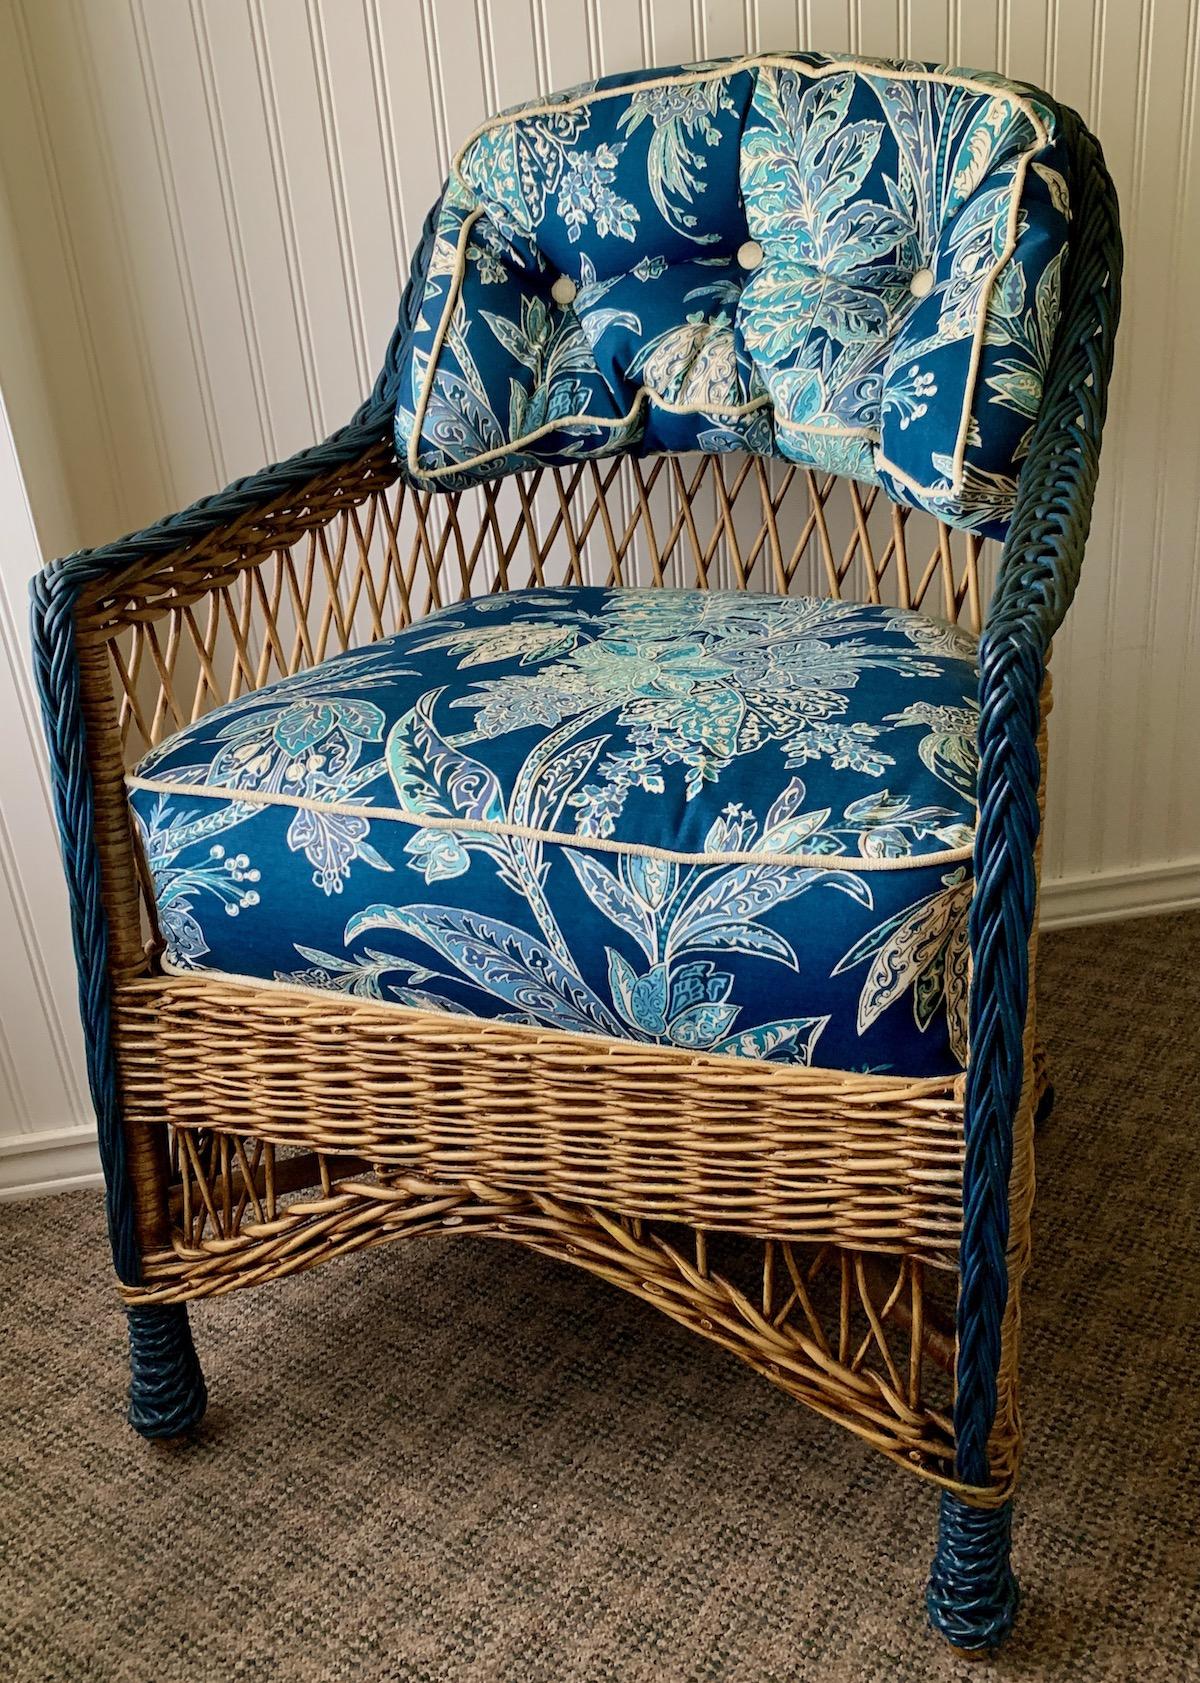 A Wicker Bar Harbor Style Chaise Lounge, Natural Finish with Navy Blue Trim In Good Condition For Sale In Nashua, NH